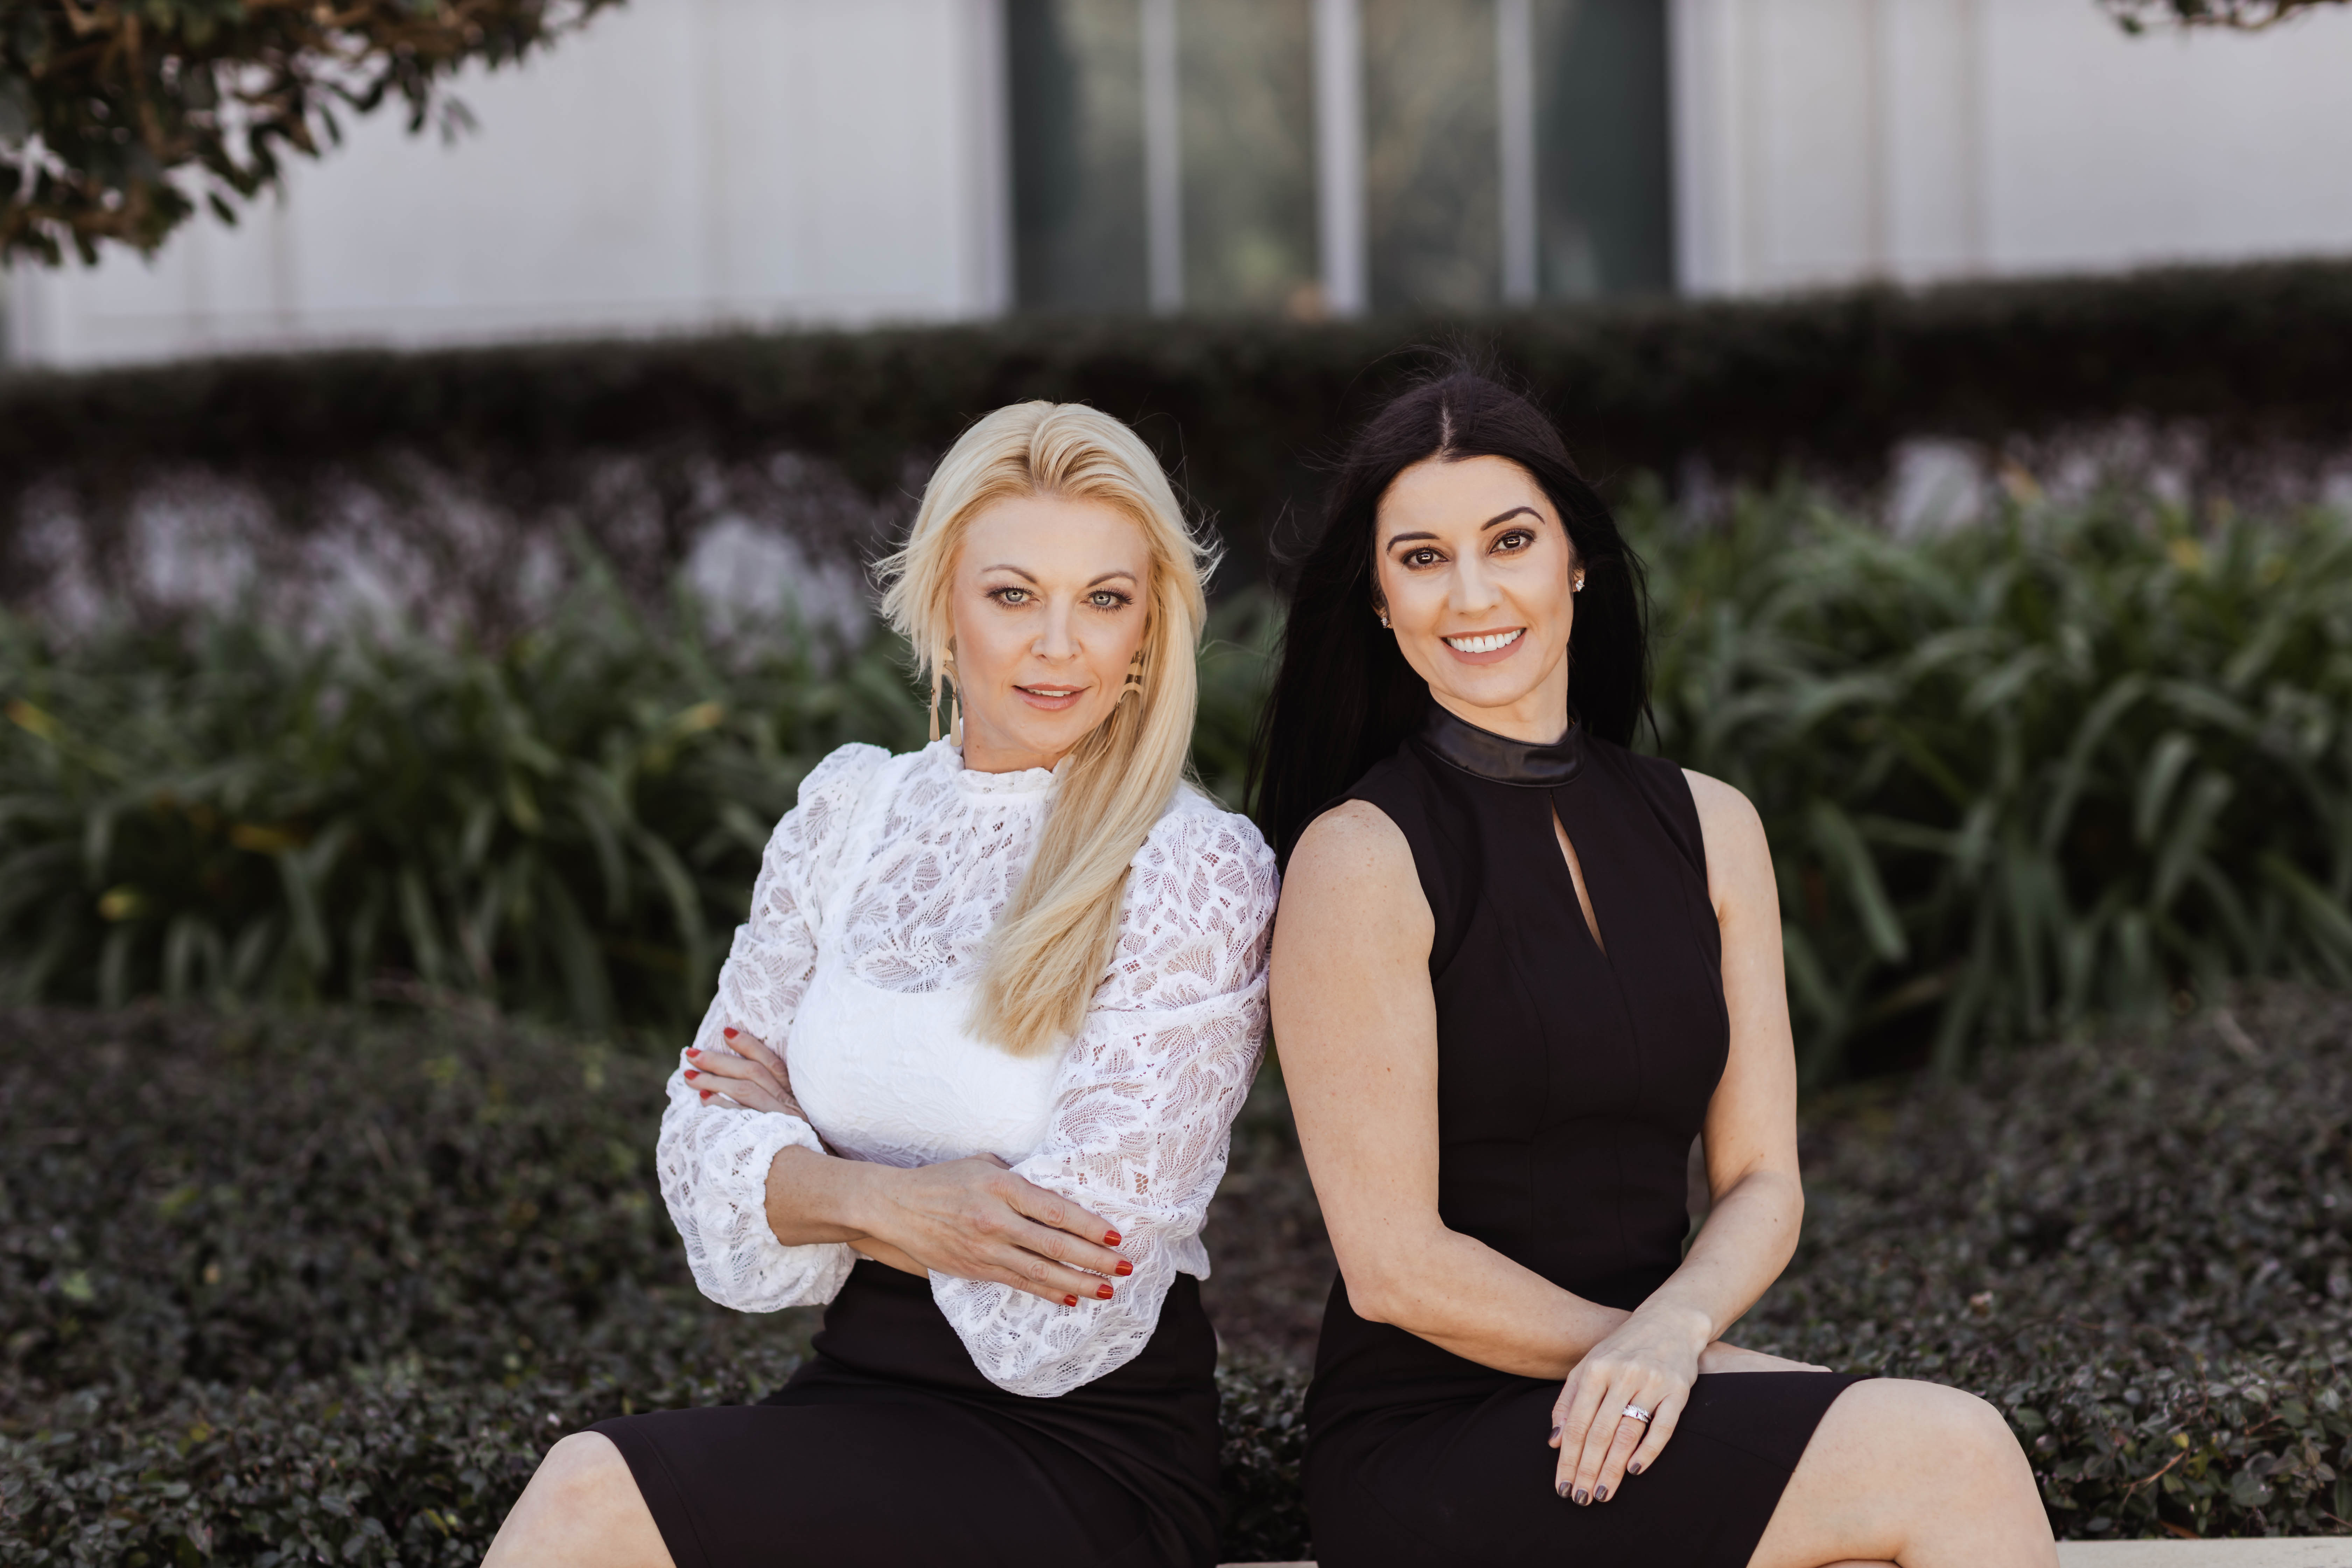 Portrait of Central Florida RE Team, Kimberly Beach-Byerly & Erica Sadelfeld, Most Units Listed | Multi-Million Dollar Producers | REALTORS®.